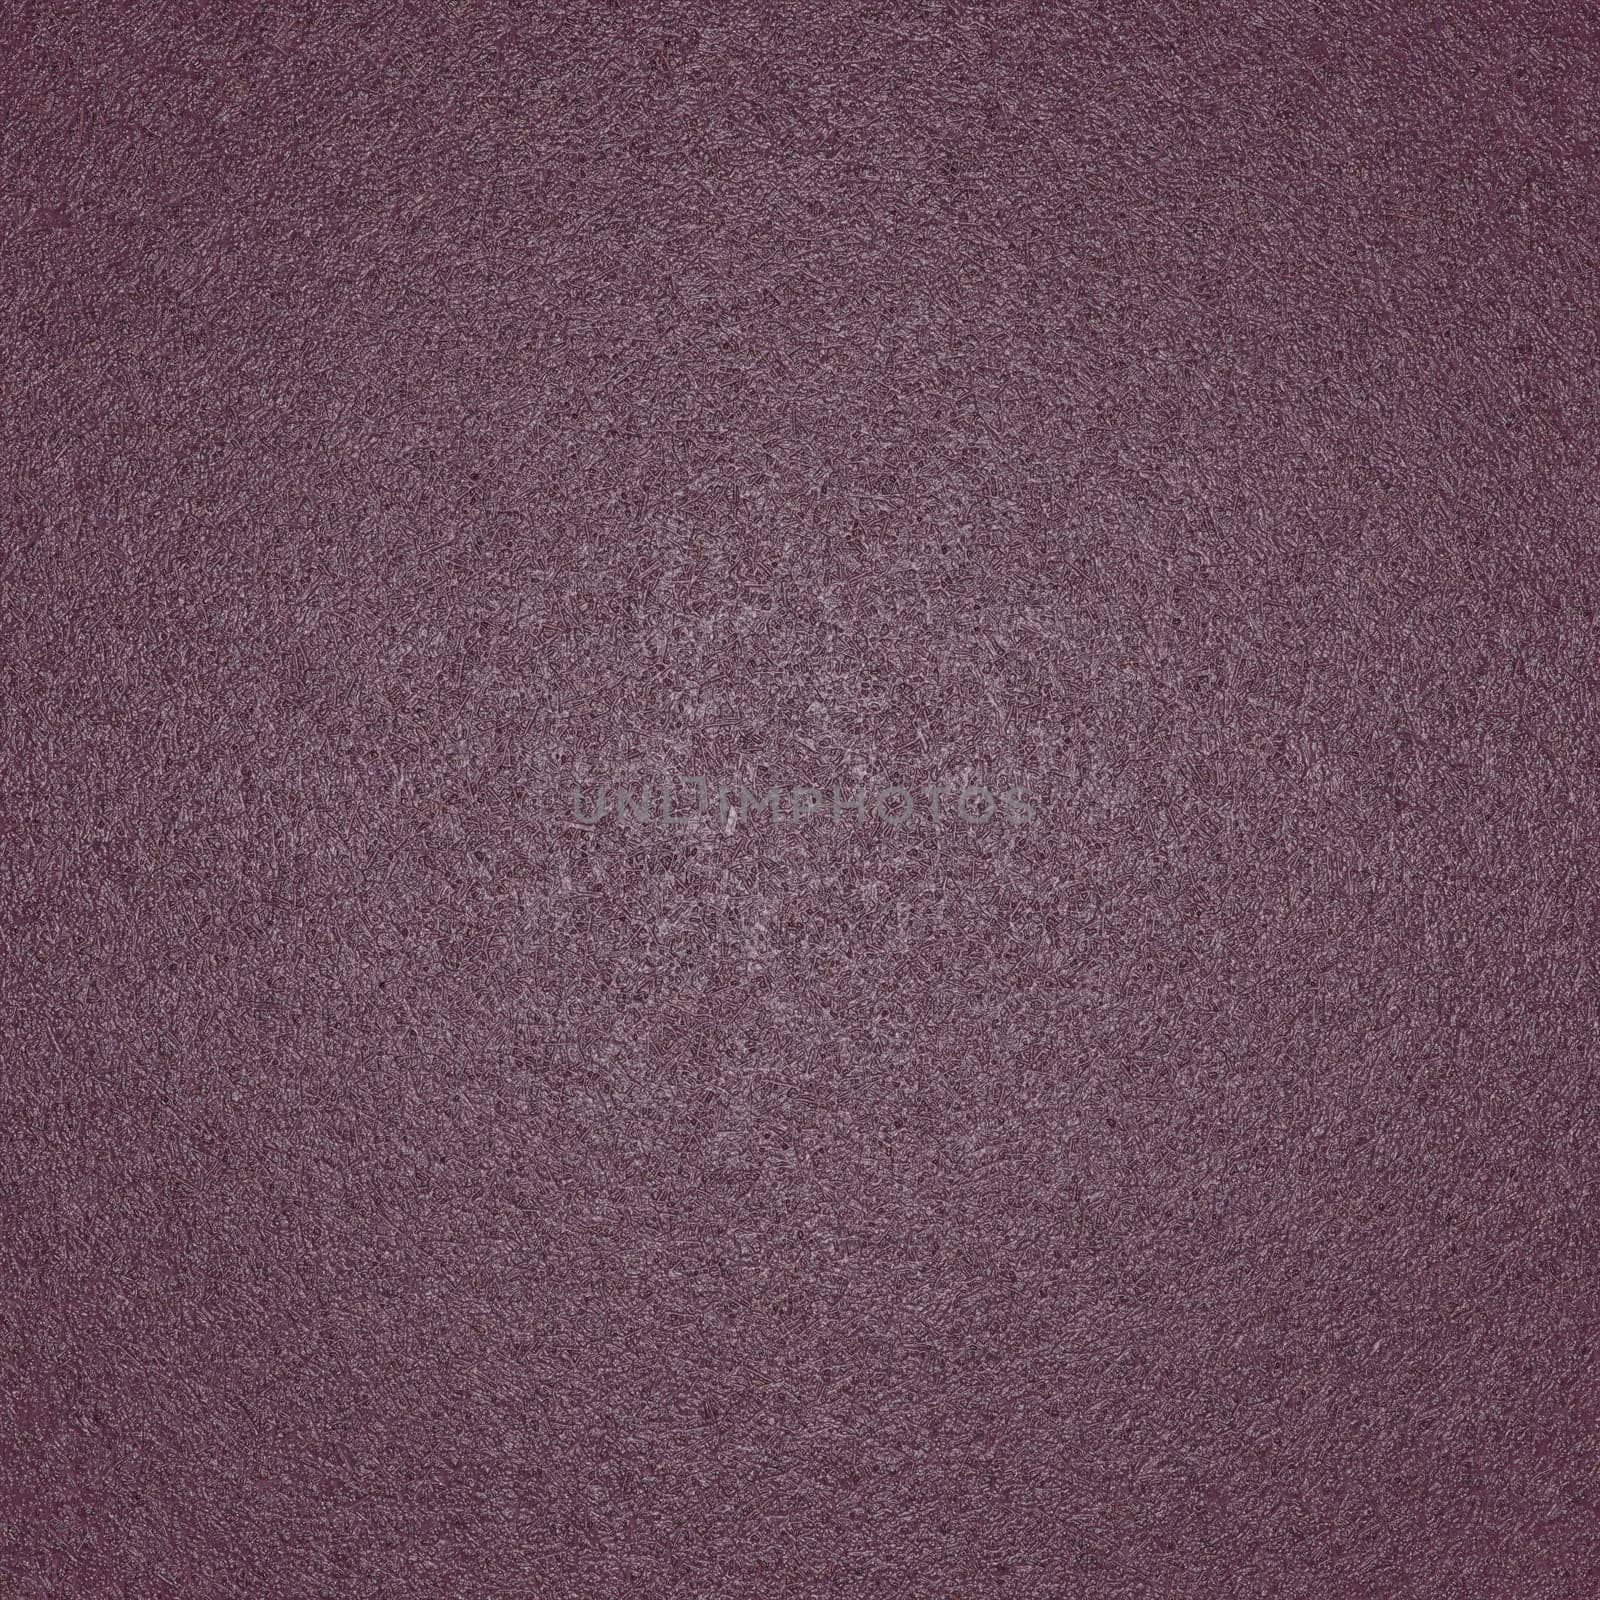 The background texture is purple with a rough glossy surface